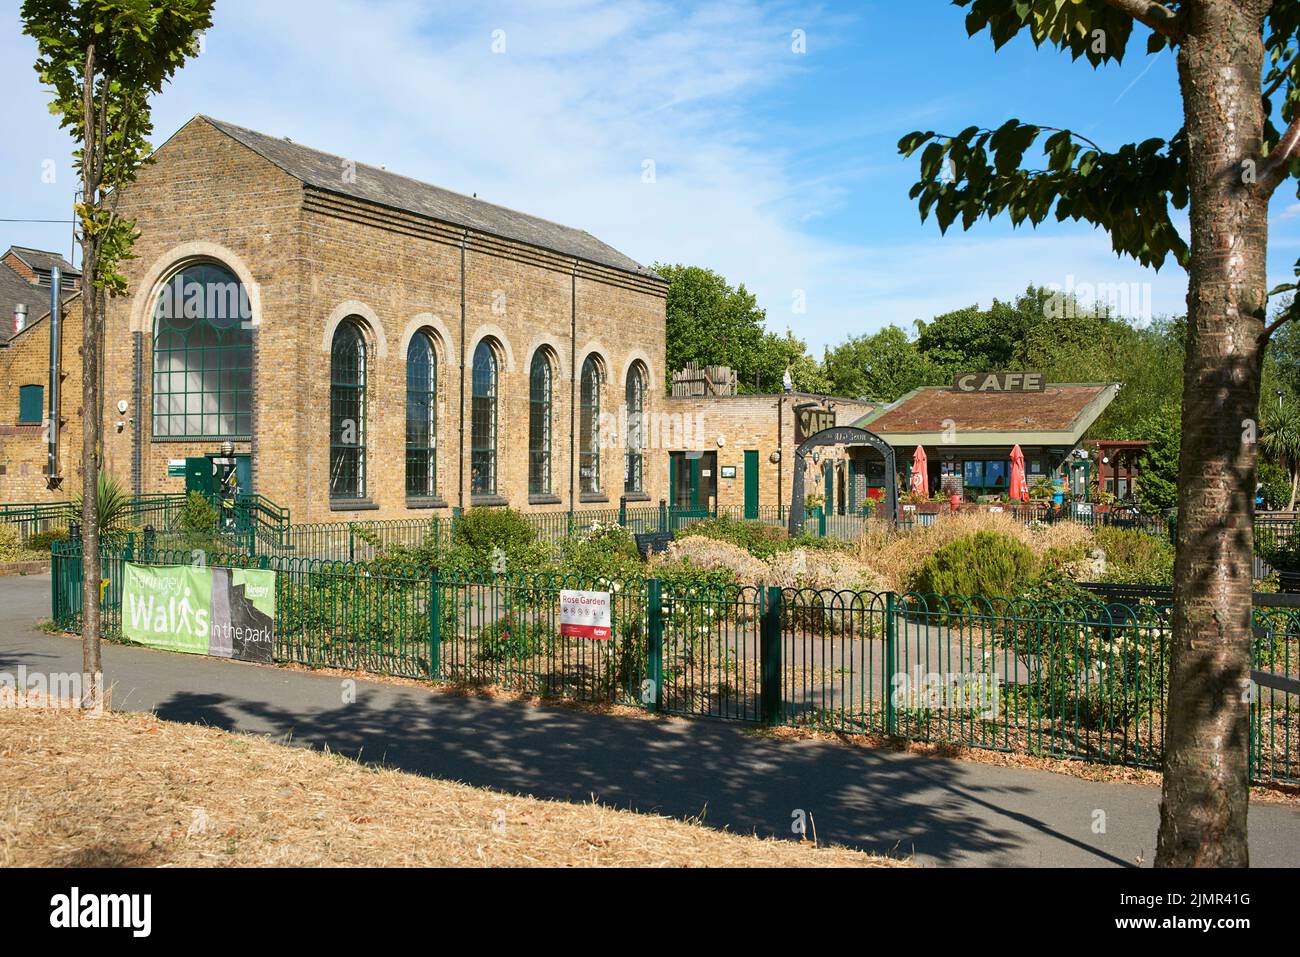 The Engine House and cafe at Markfield Park, Tottenham, North London UK Stock Photo